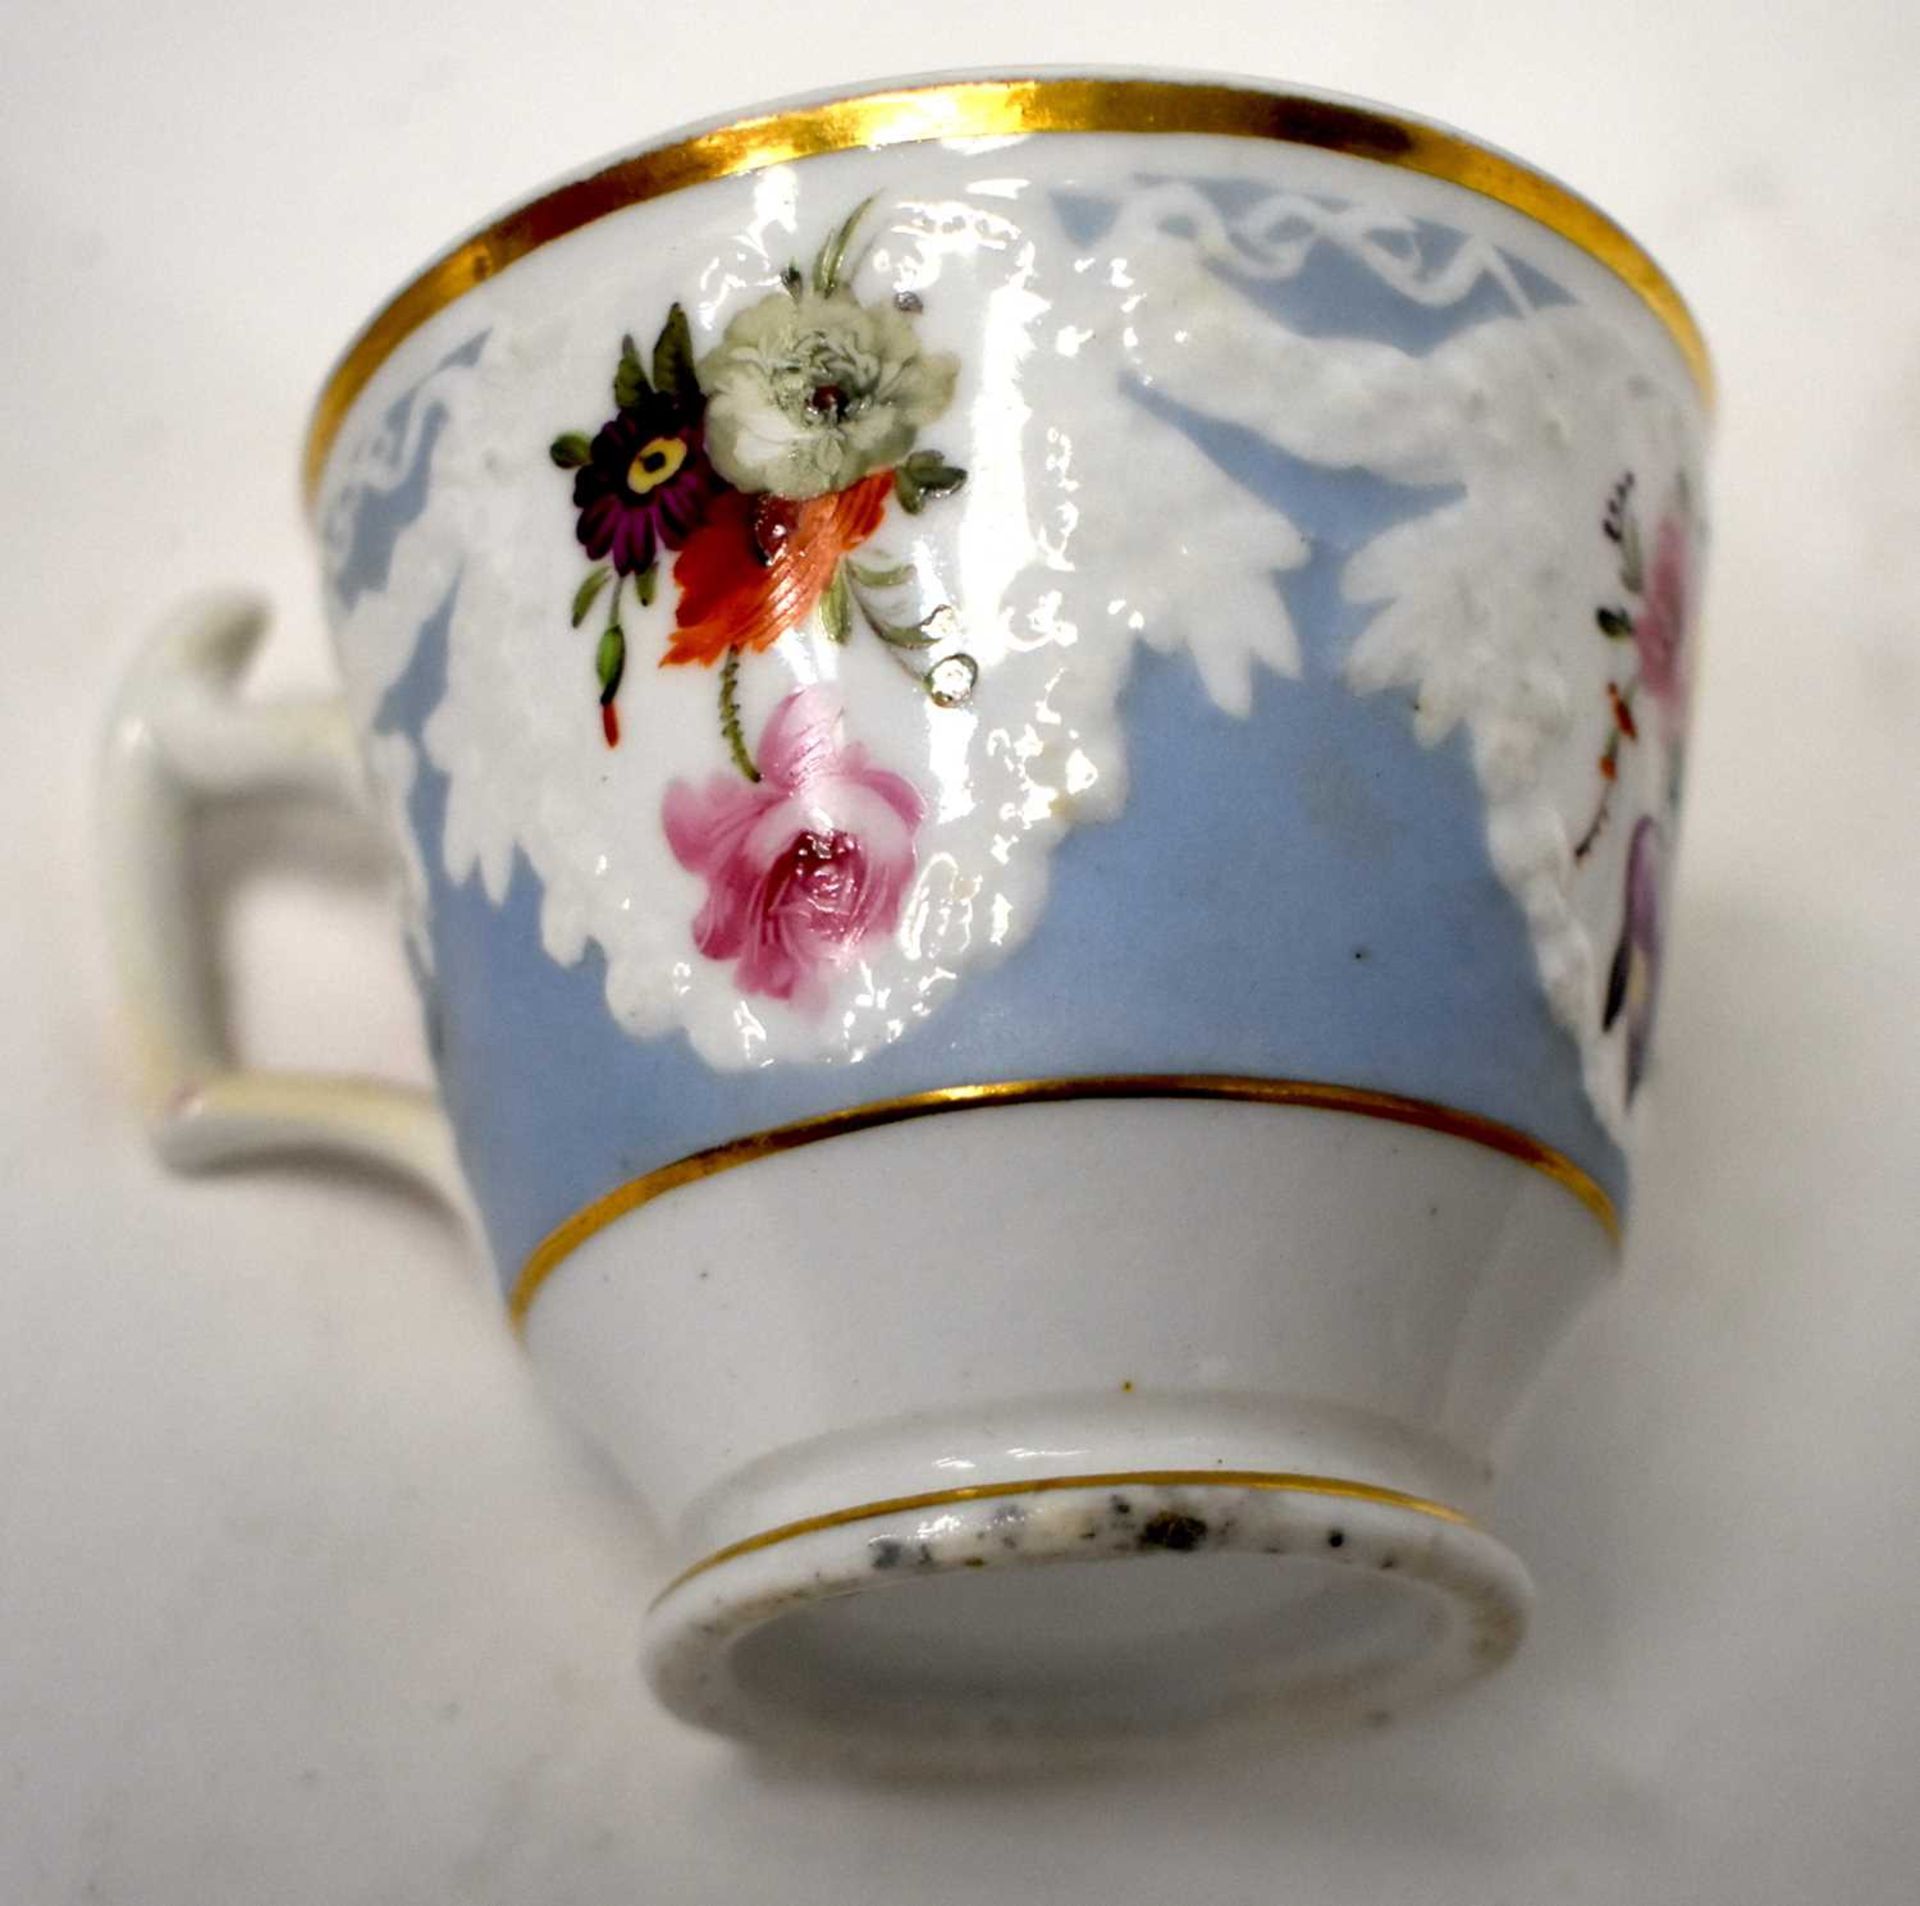 AN EARLY 19TH CENTURY CHAMBERLAINS WORCESTER PART TEASET painted with floral sprays, under a moulded - Image 30 of 36